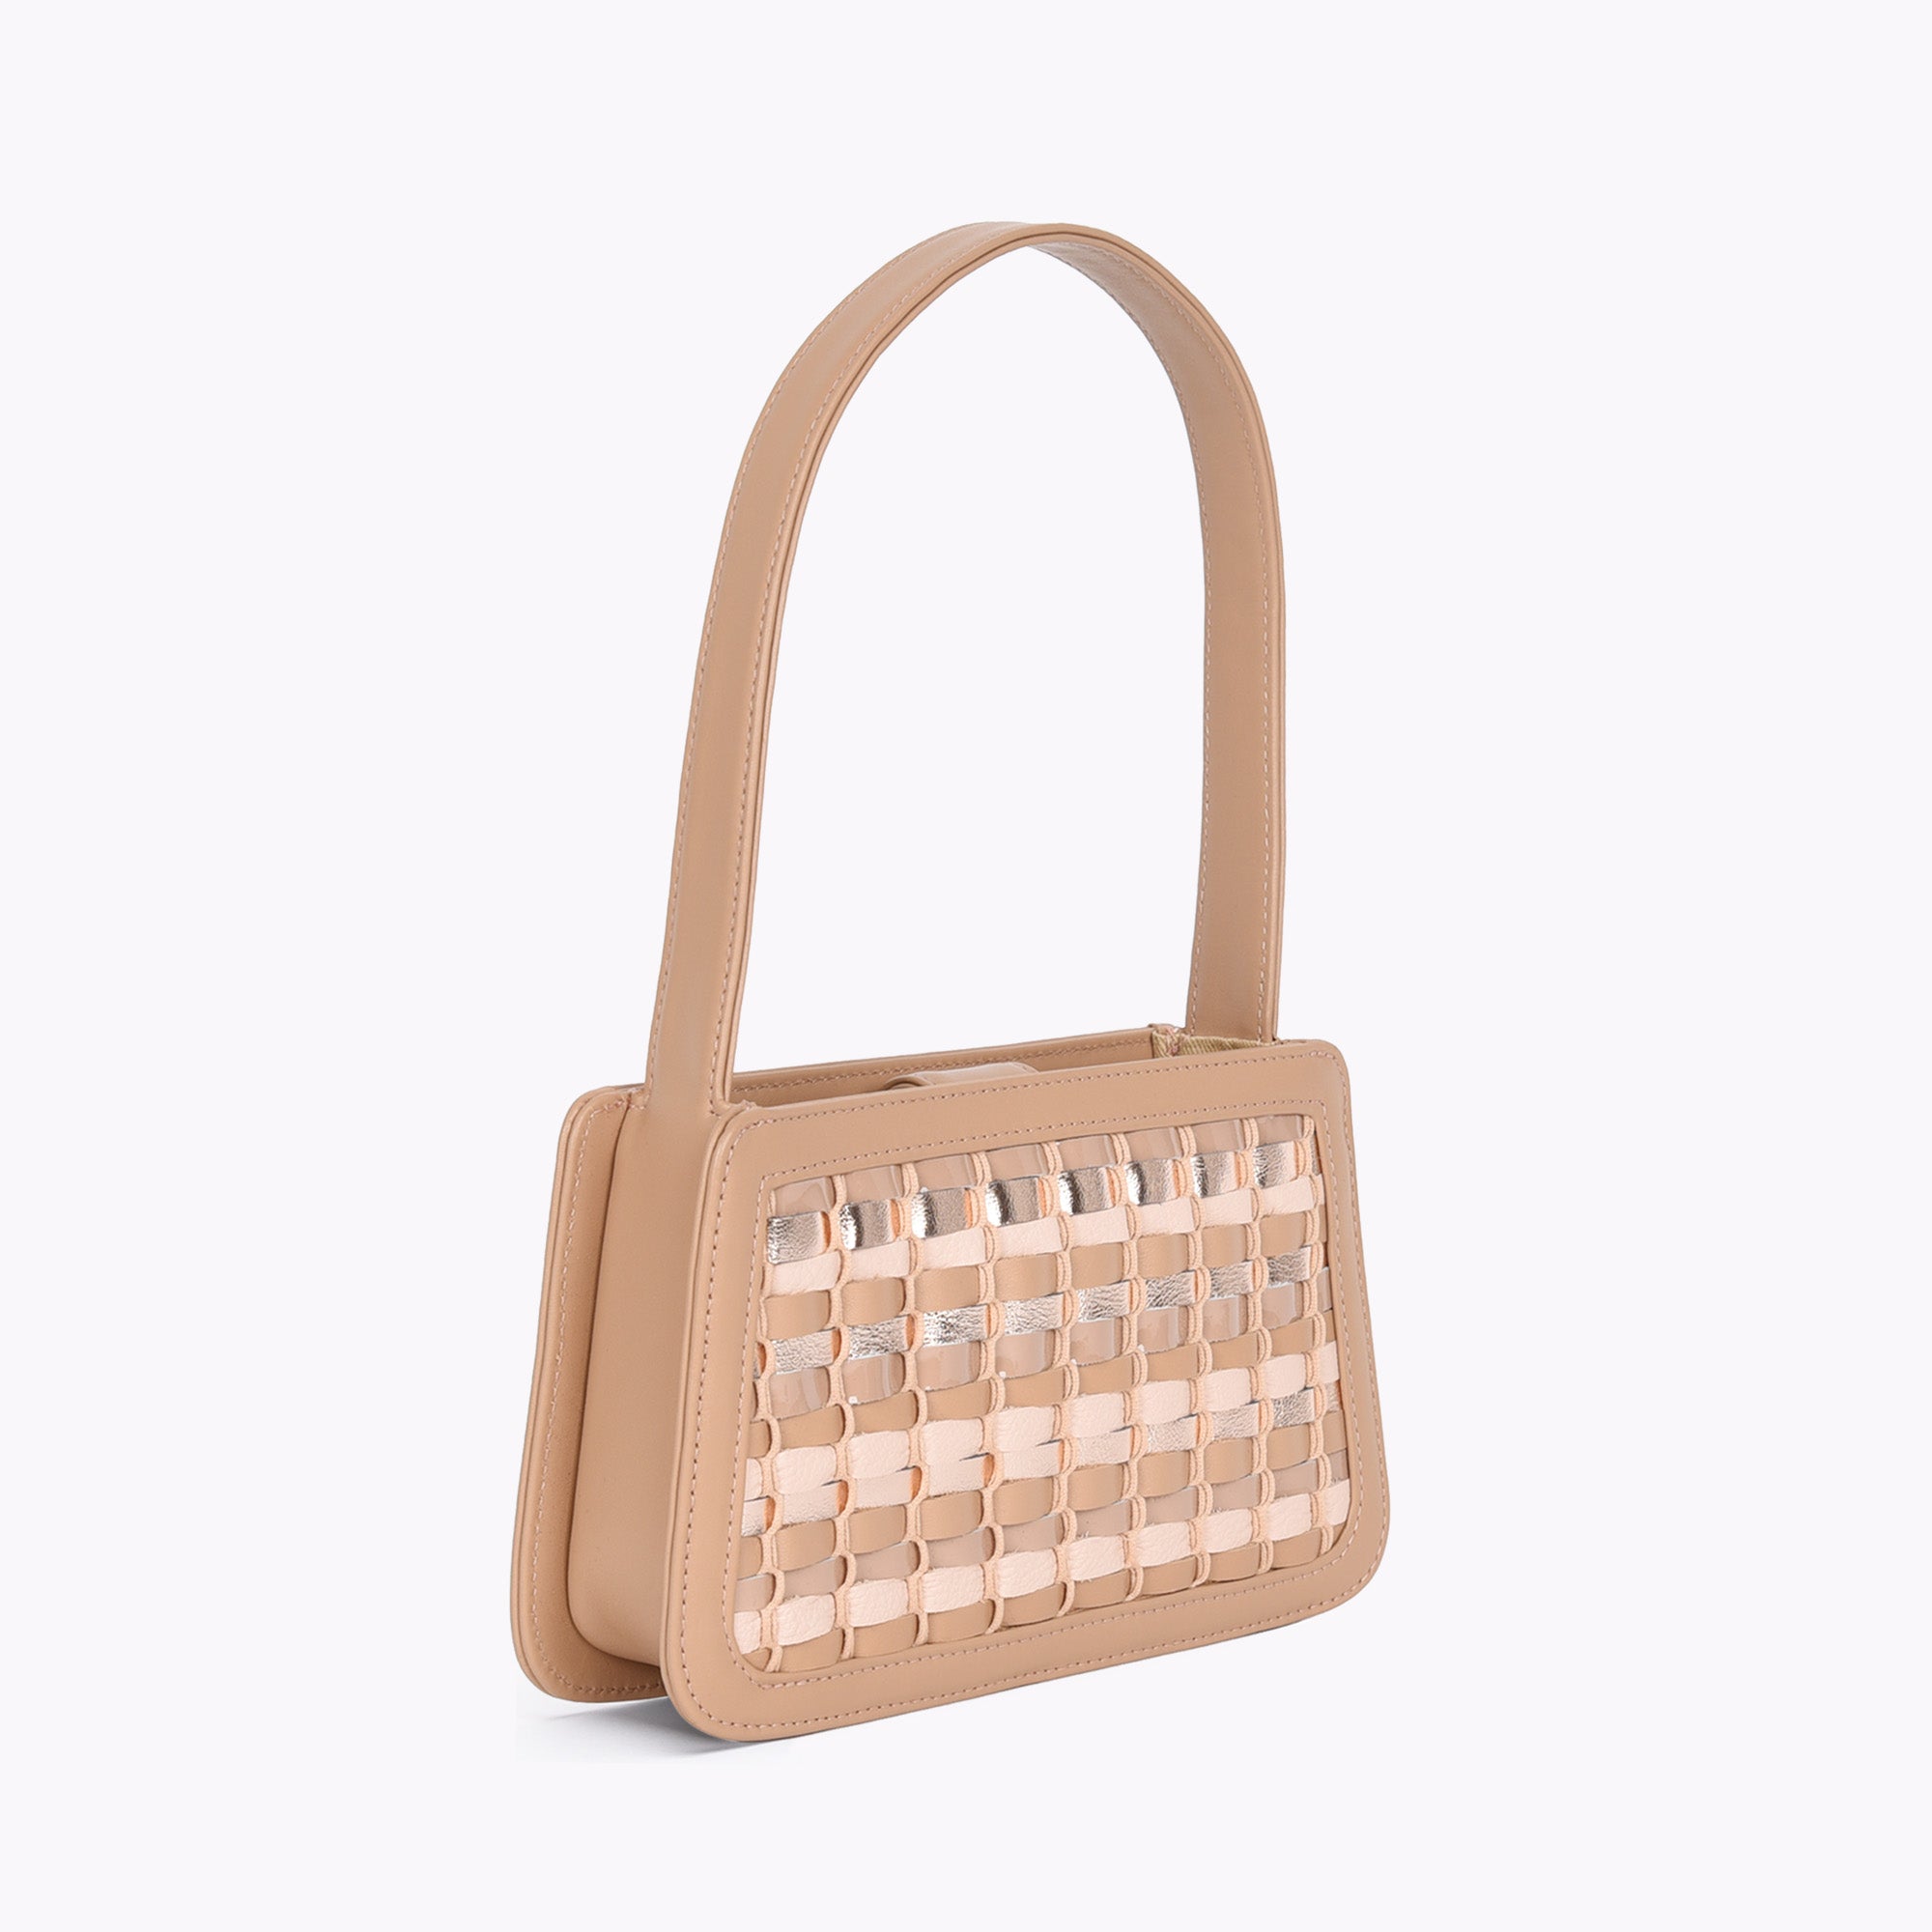 picture of made in USA Luxury Leather Handbag hand-woven with multiple leathers in a beige, gold, and silver colorway